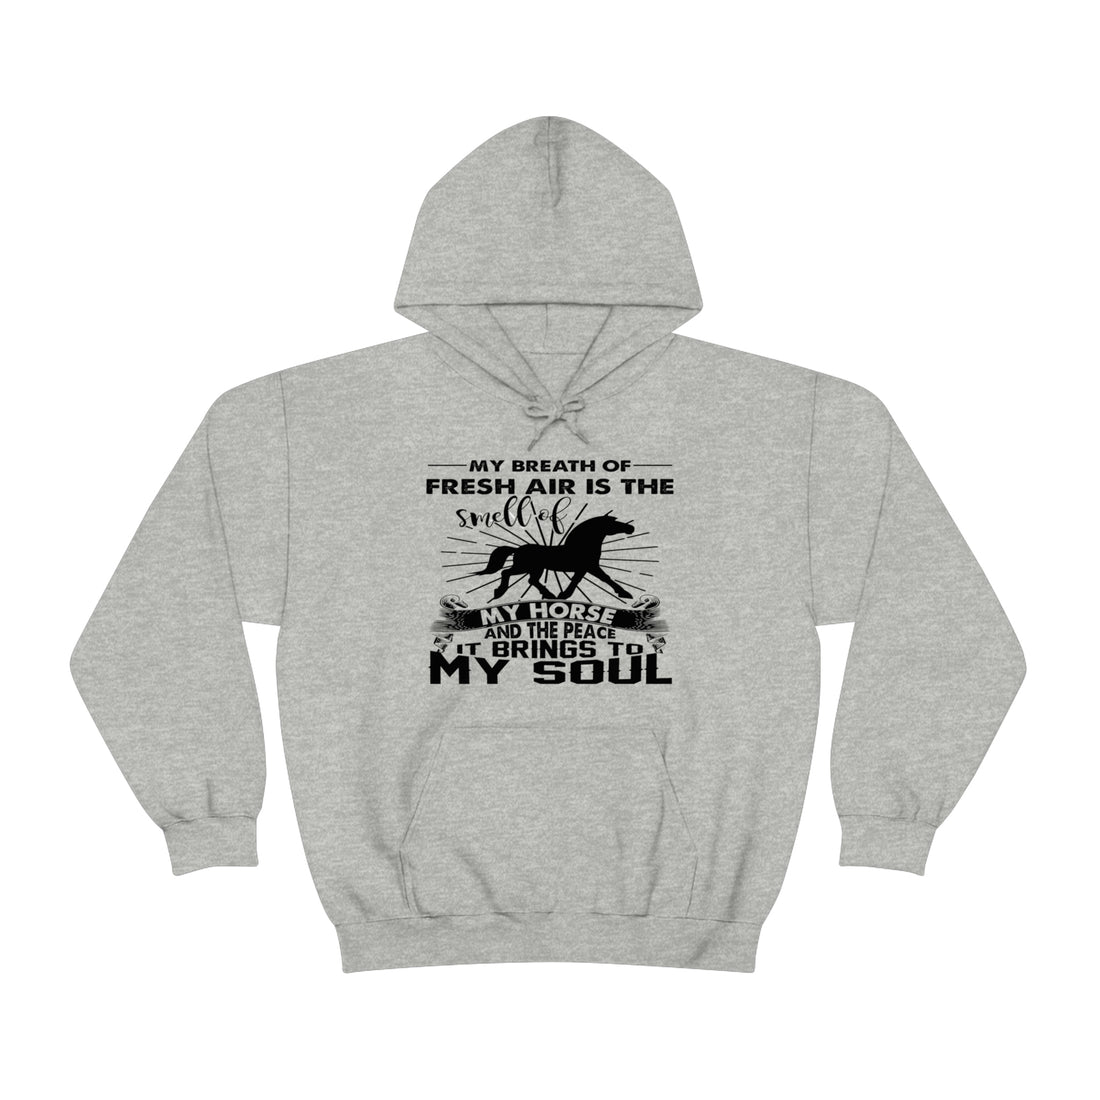 My Breath Of Fresh Air Is The Smell Of My Horse - Unisex Heavy Blend™ Hooded Sweatshirt